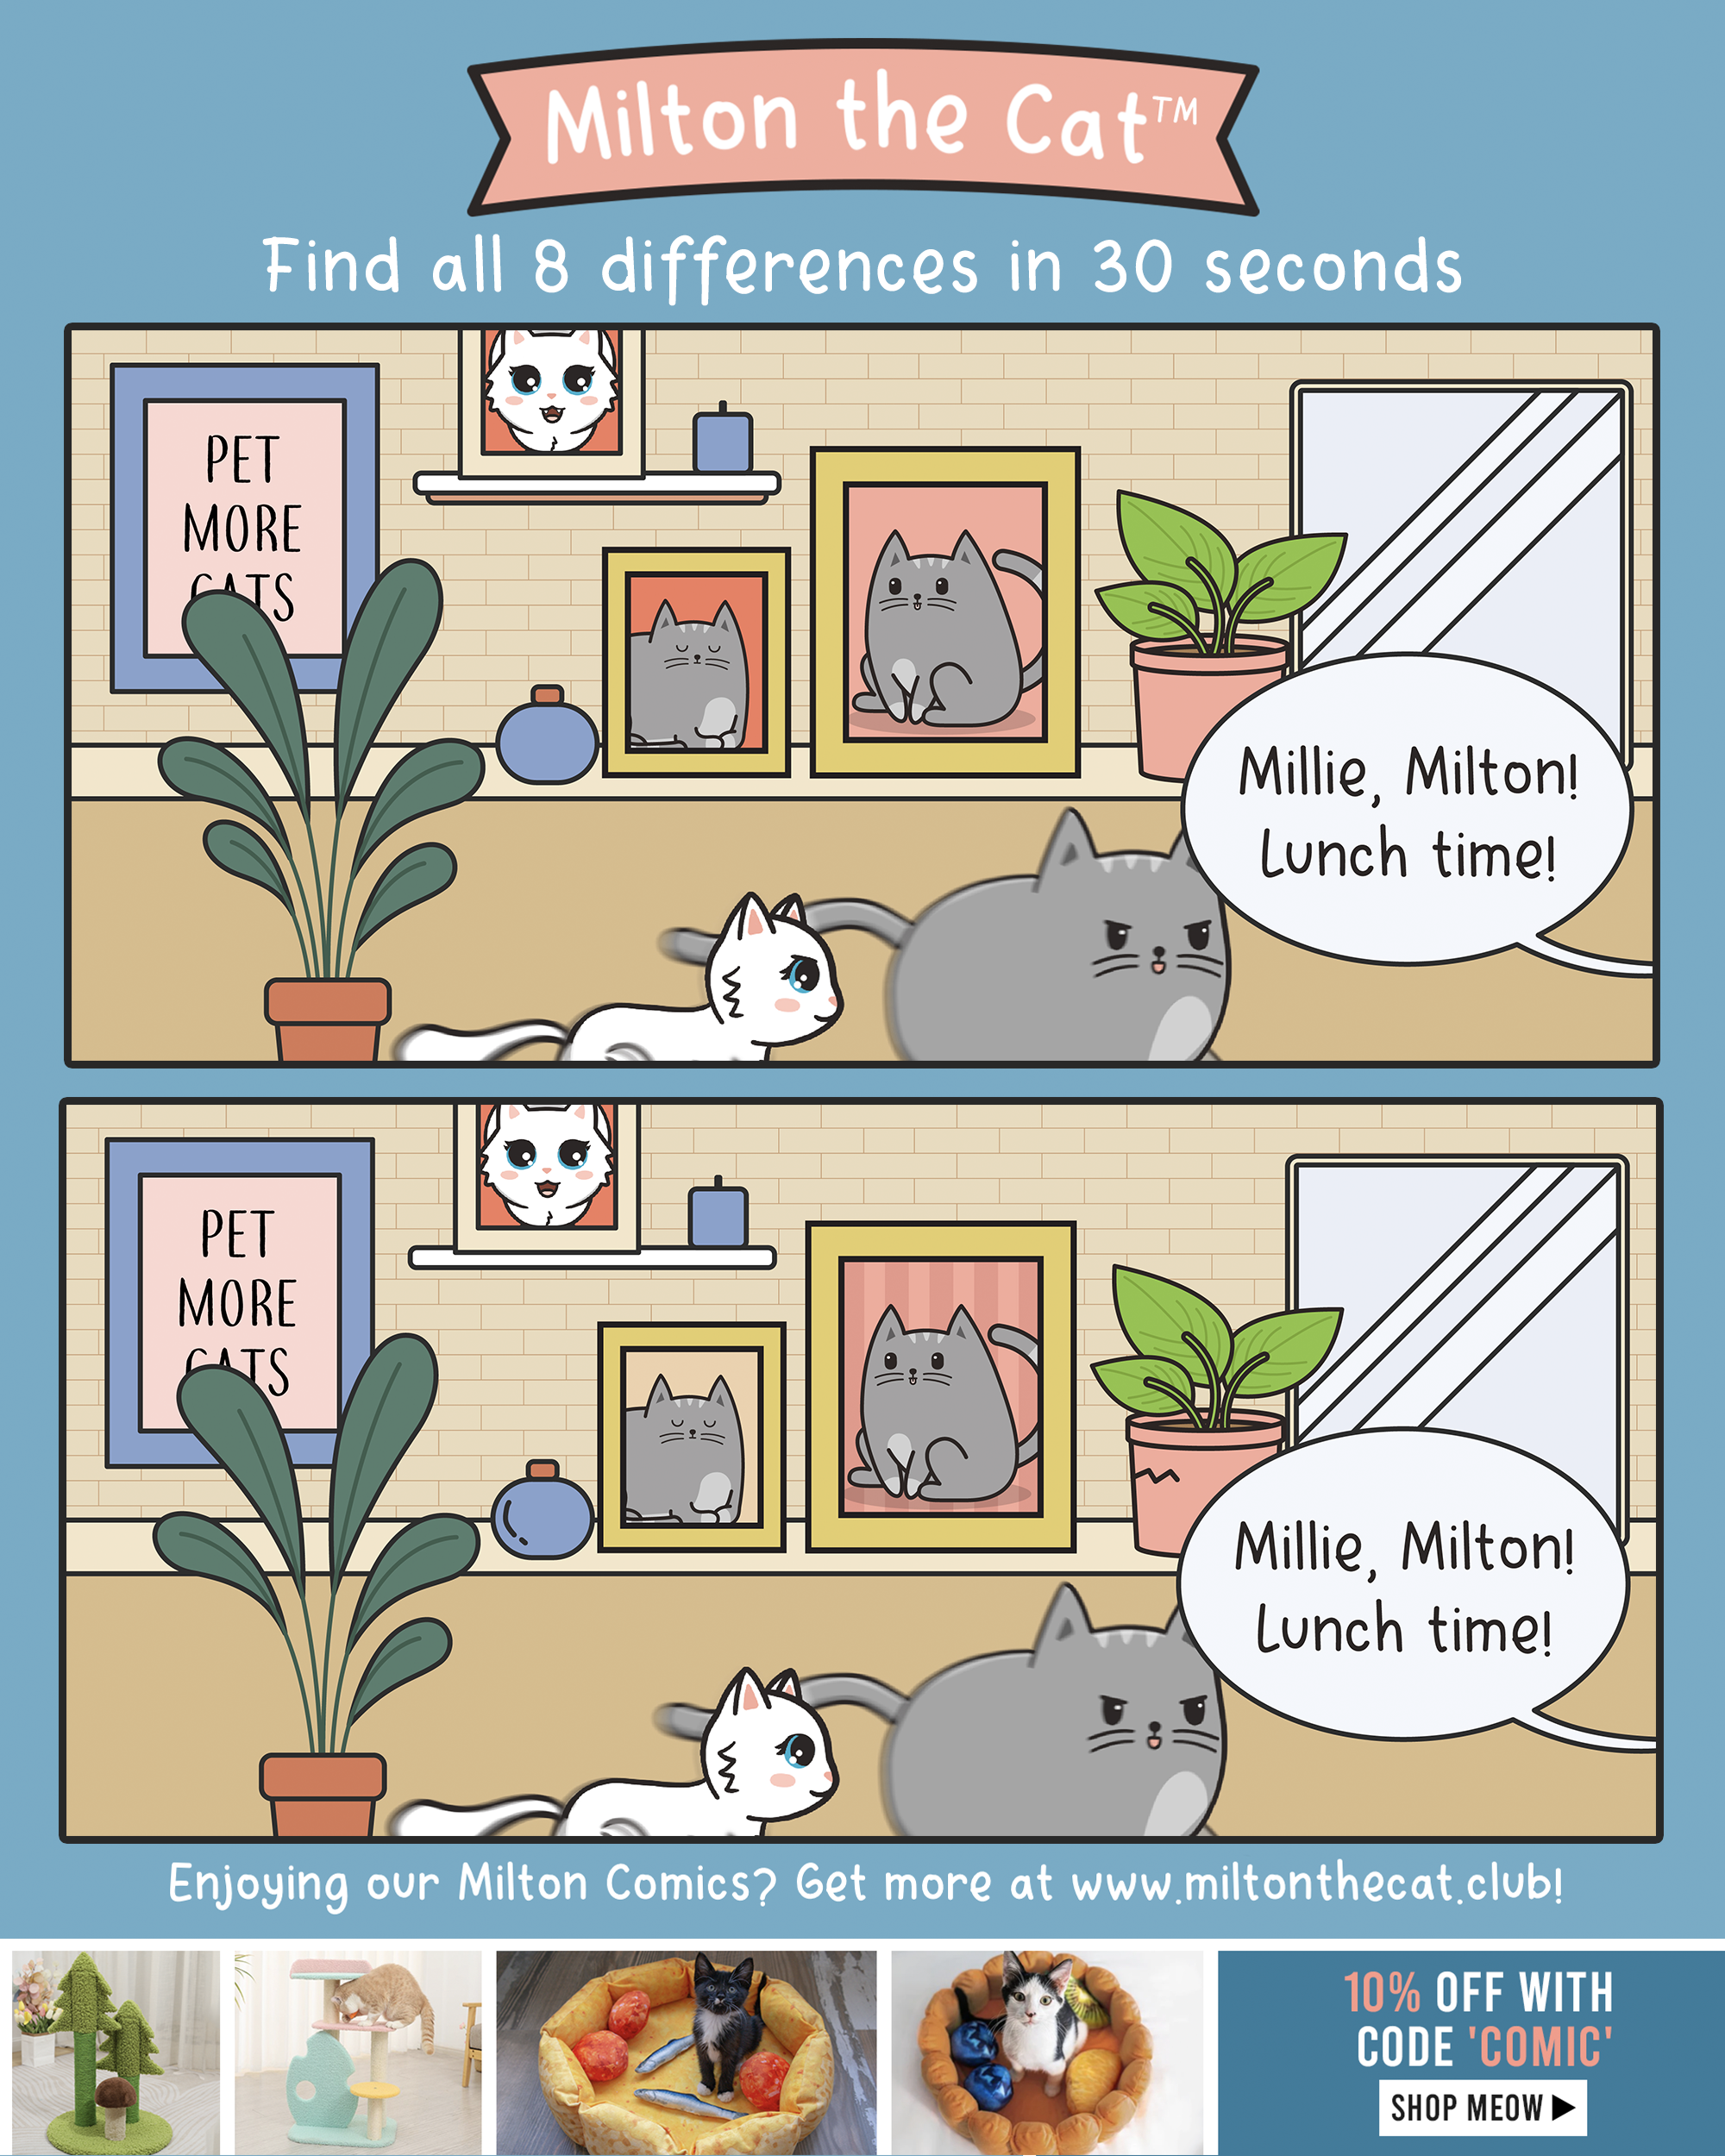 Can you spot all 8 differences in 30 seconds?